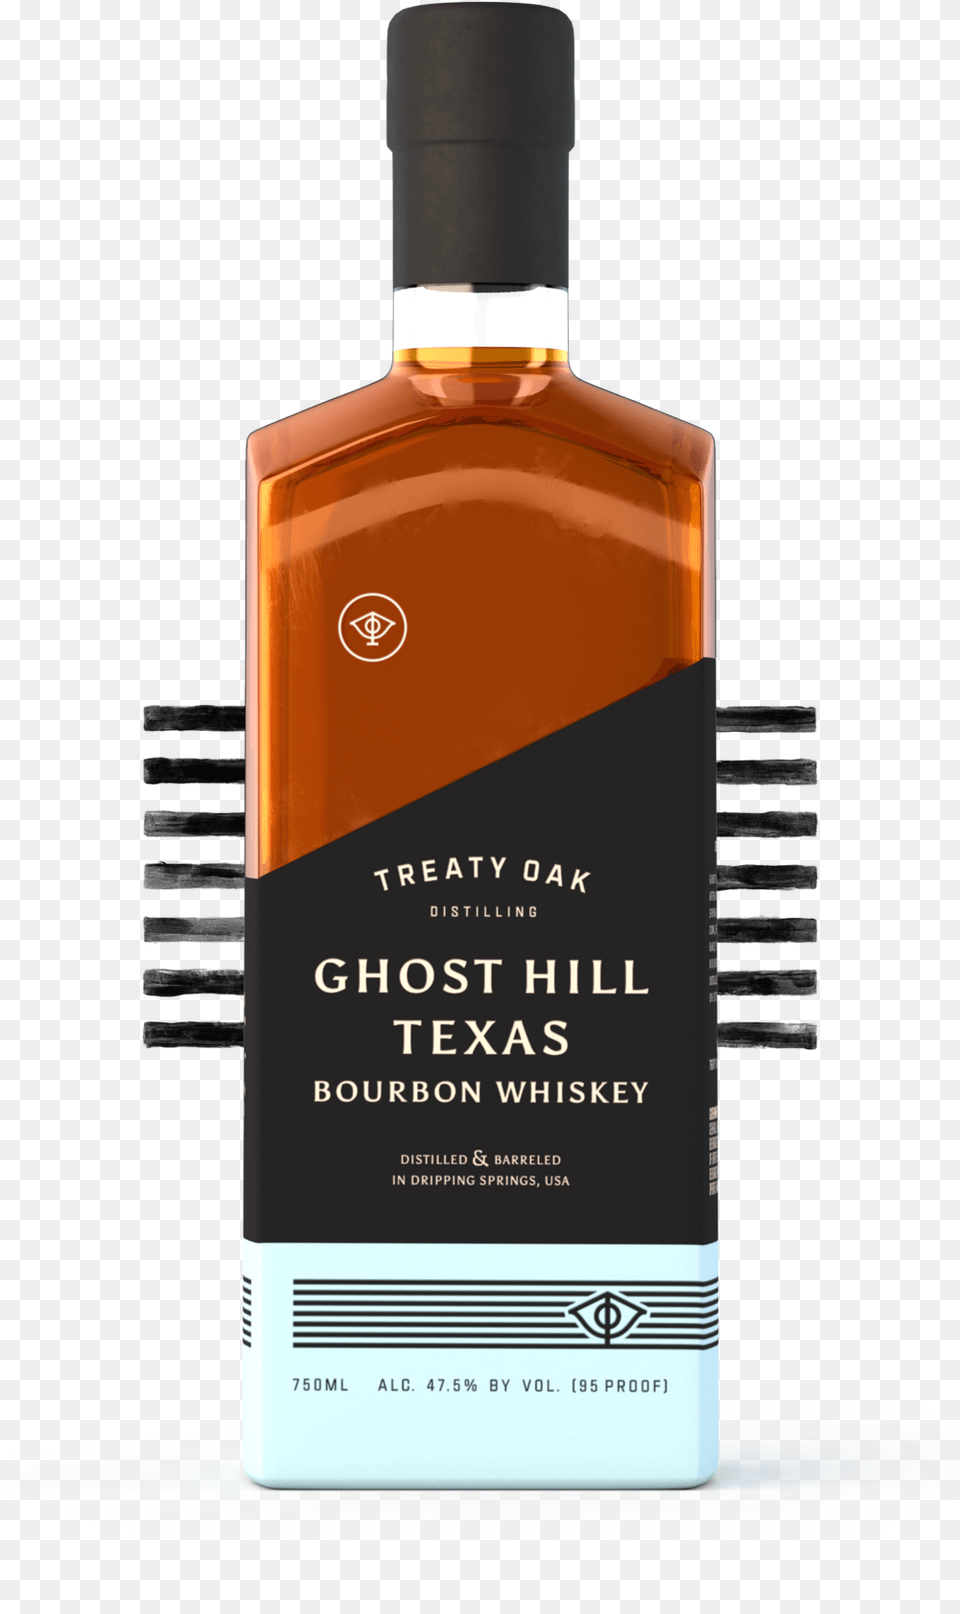 Ghb Whiskey With Stripes Treaty Oak Whiskey, Alcohol, Beverage, Liquor, Bottle Png